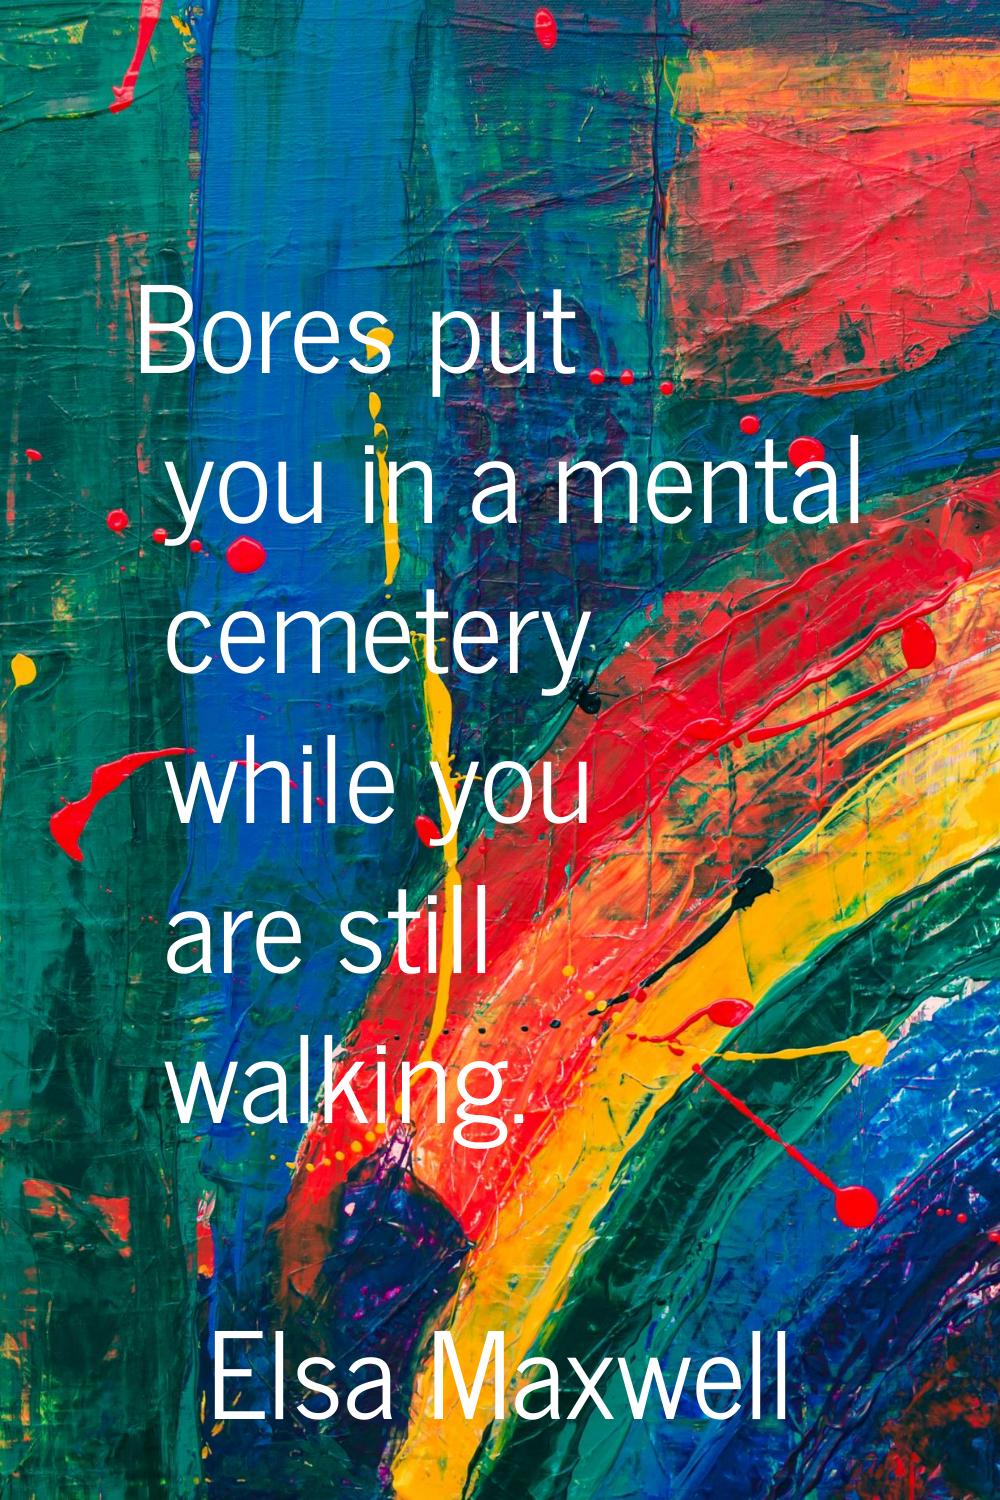 Bores put you in a mental cemetery while you are still walking.